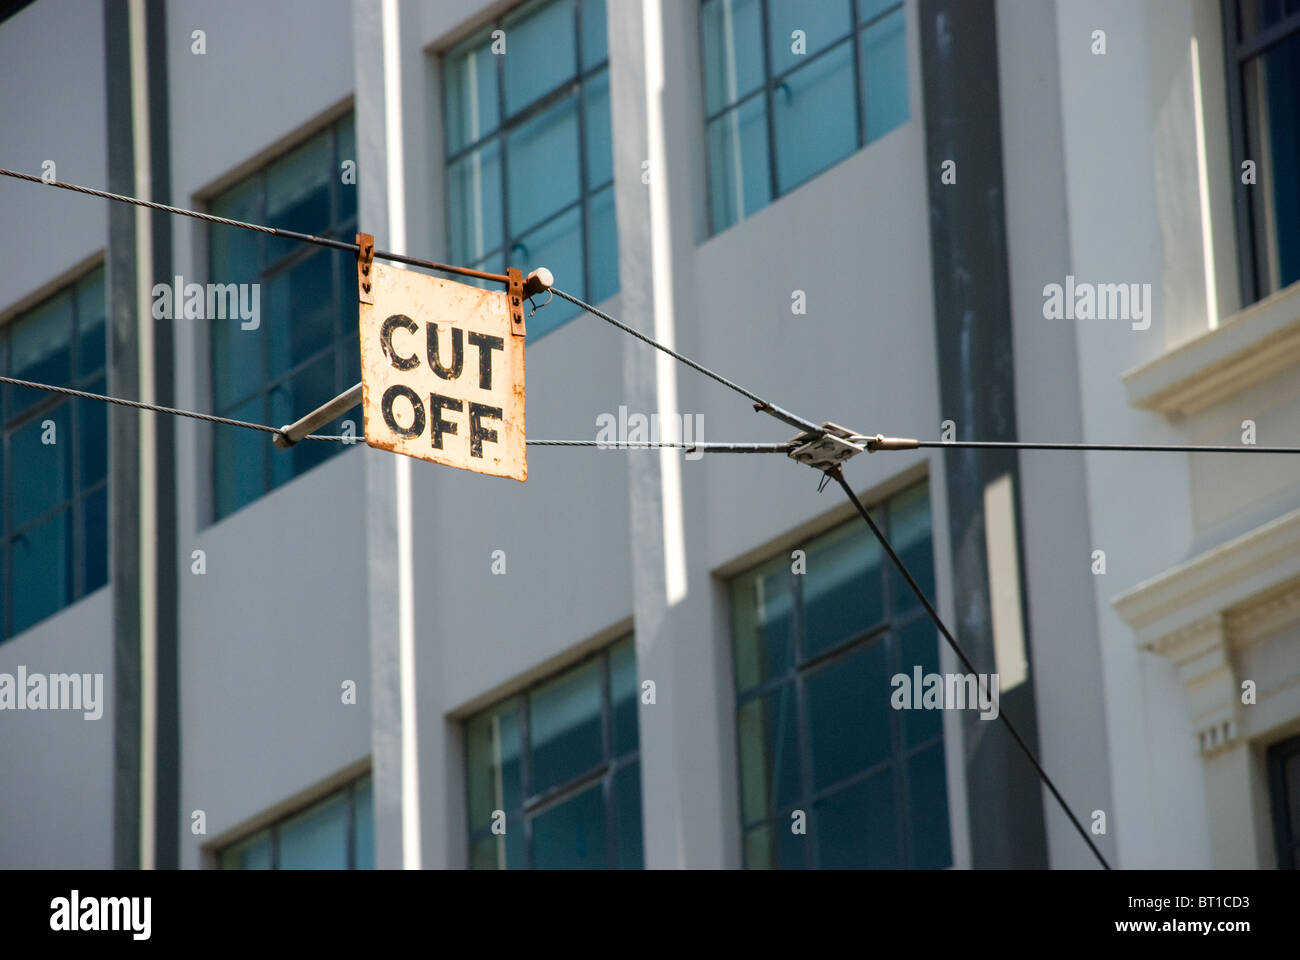 Cut off sign on electric tram / transport system in Wellington New Zealand Stock Photo